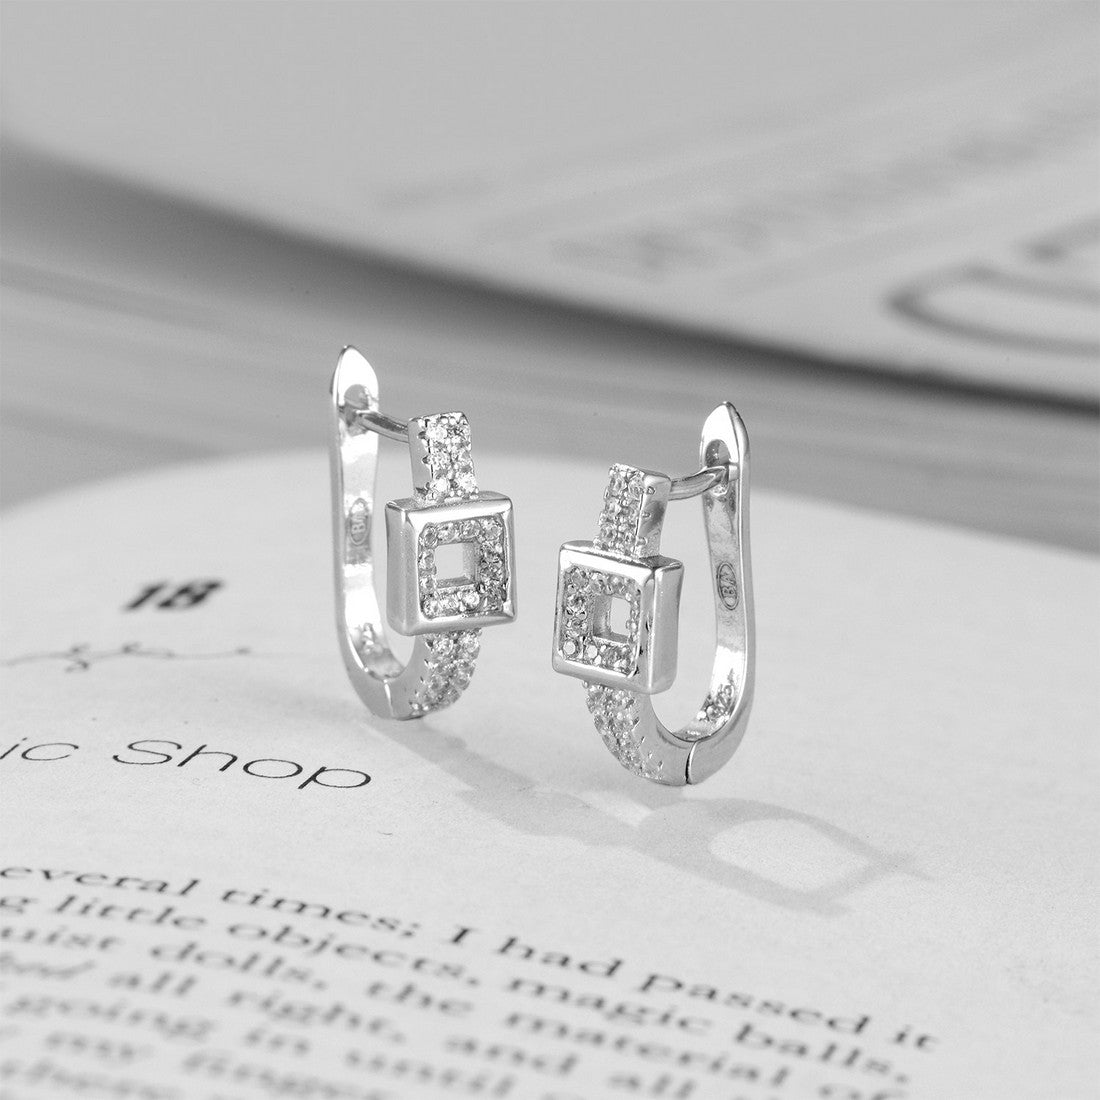 Lavish and Luxurious Silver Huggie 925 Silver Earrings